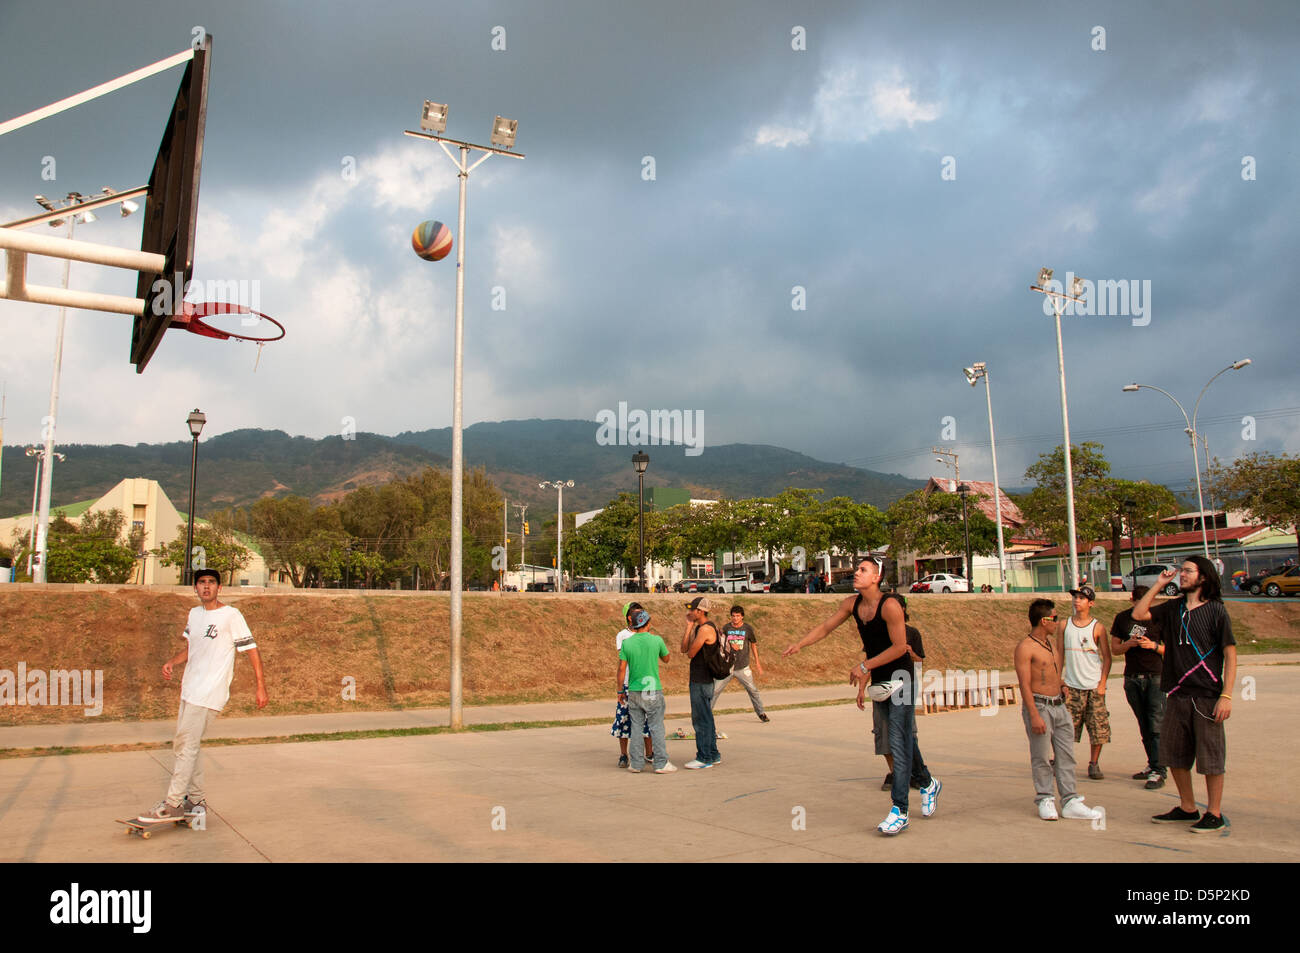 Youth playing basket ball in Ciudad Colon a small town located in the Central Valley Costa Rica Stock Photo